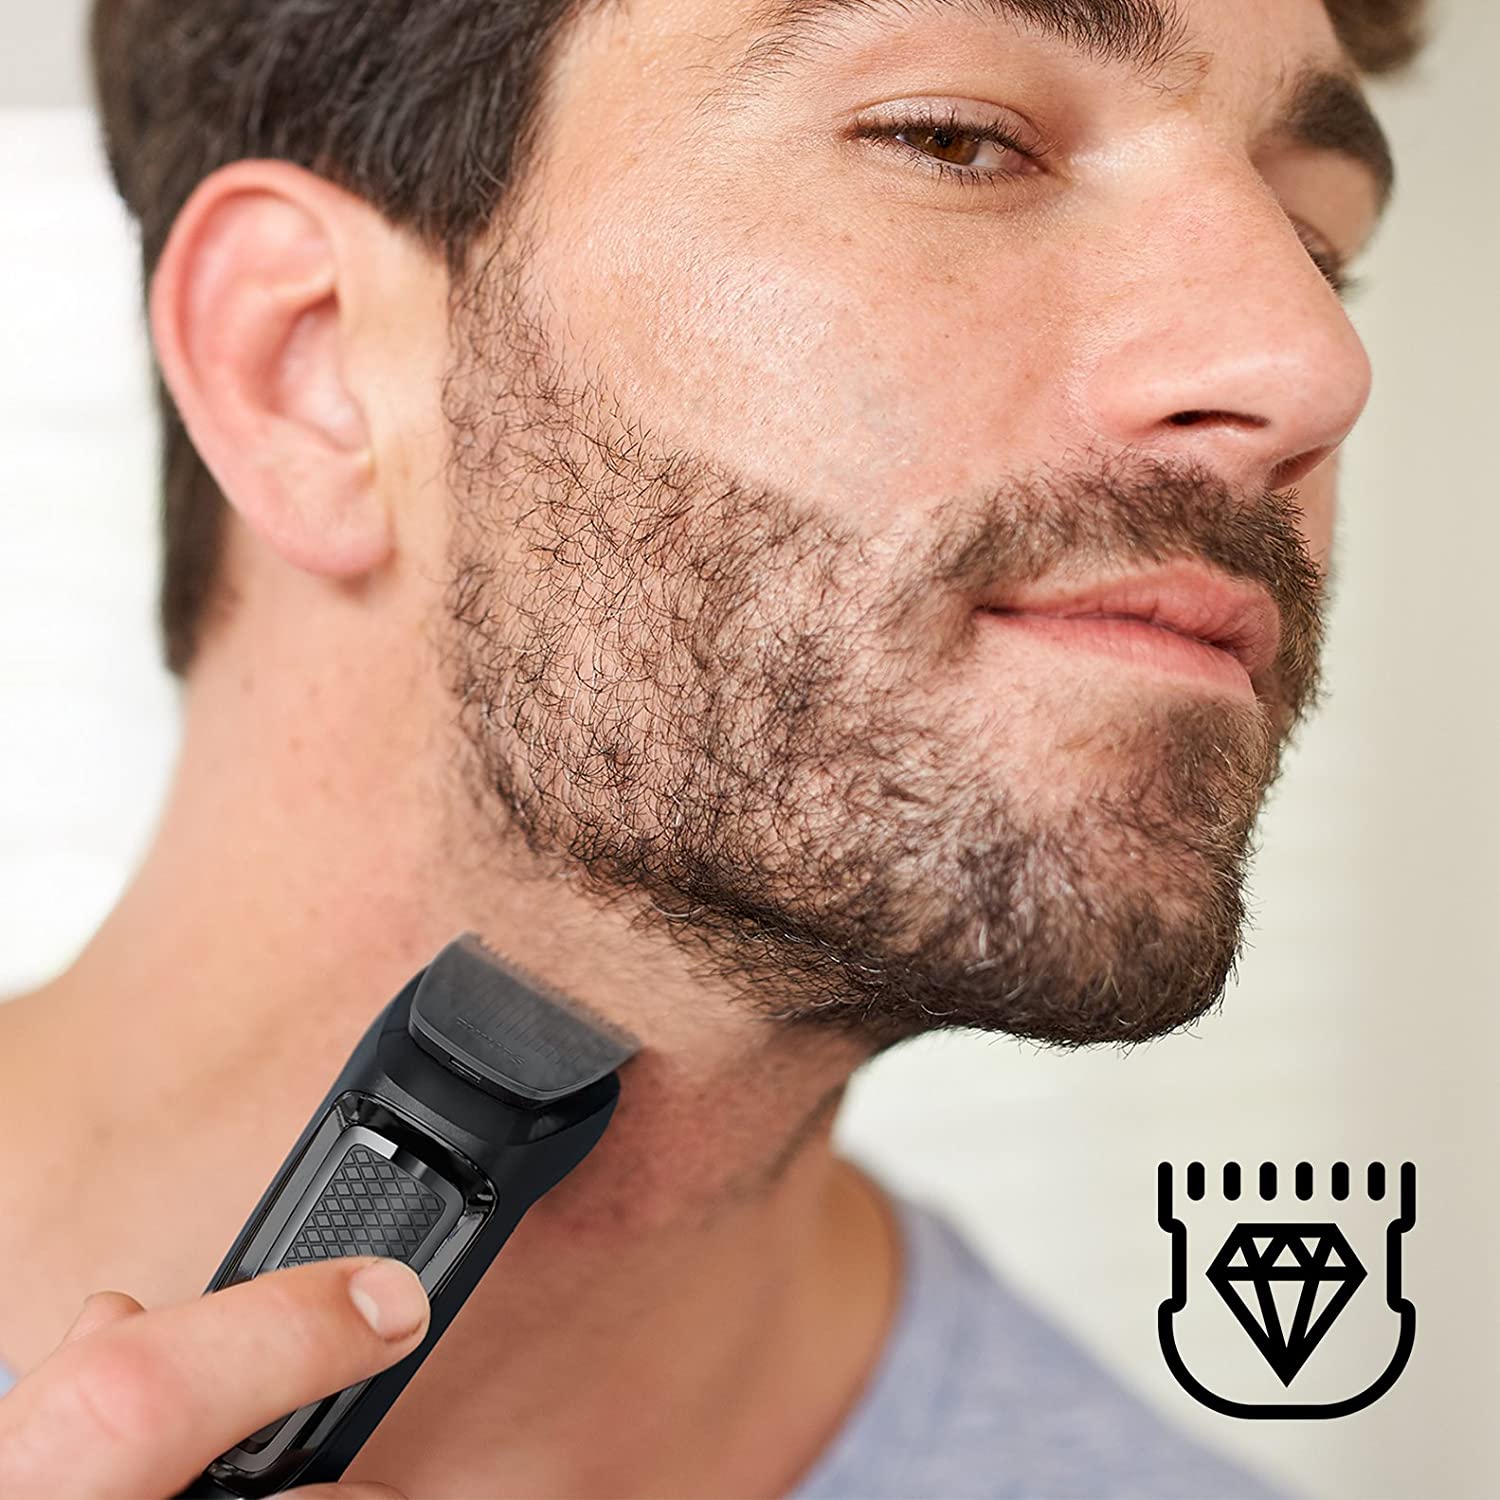 Philips Series 3000 7-in-1 Multi Grooming Kit for Beard and Hair with Nose Trimmer Attachment - MG3720/33